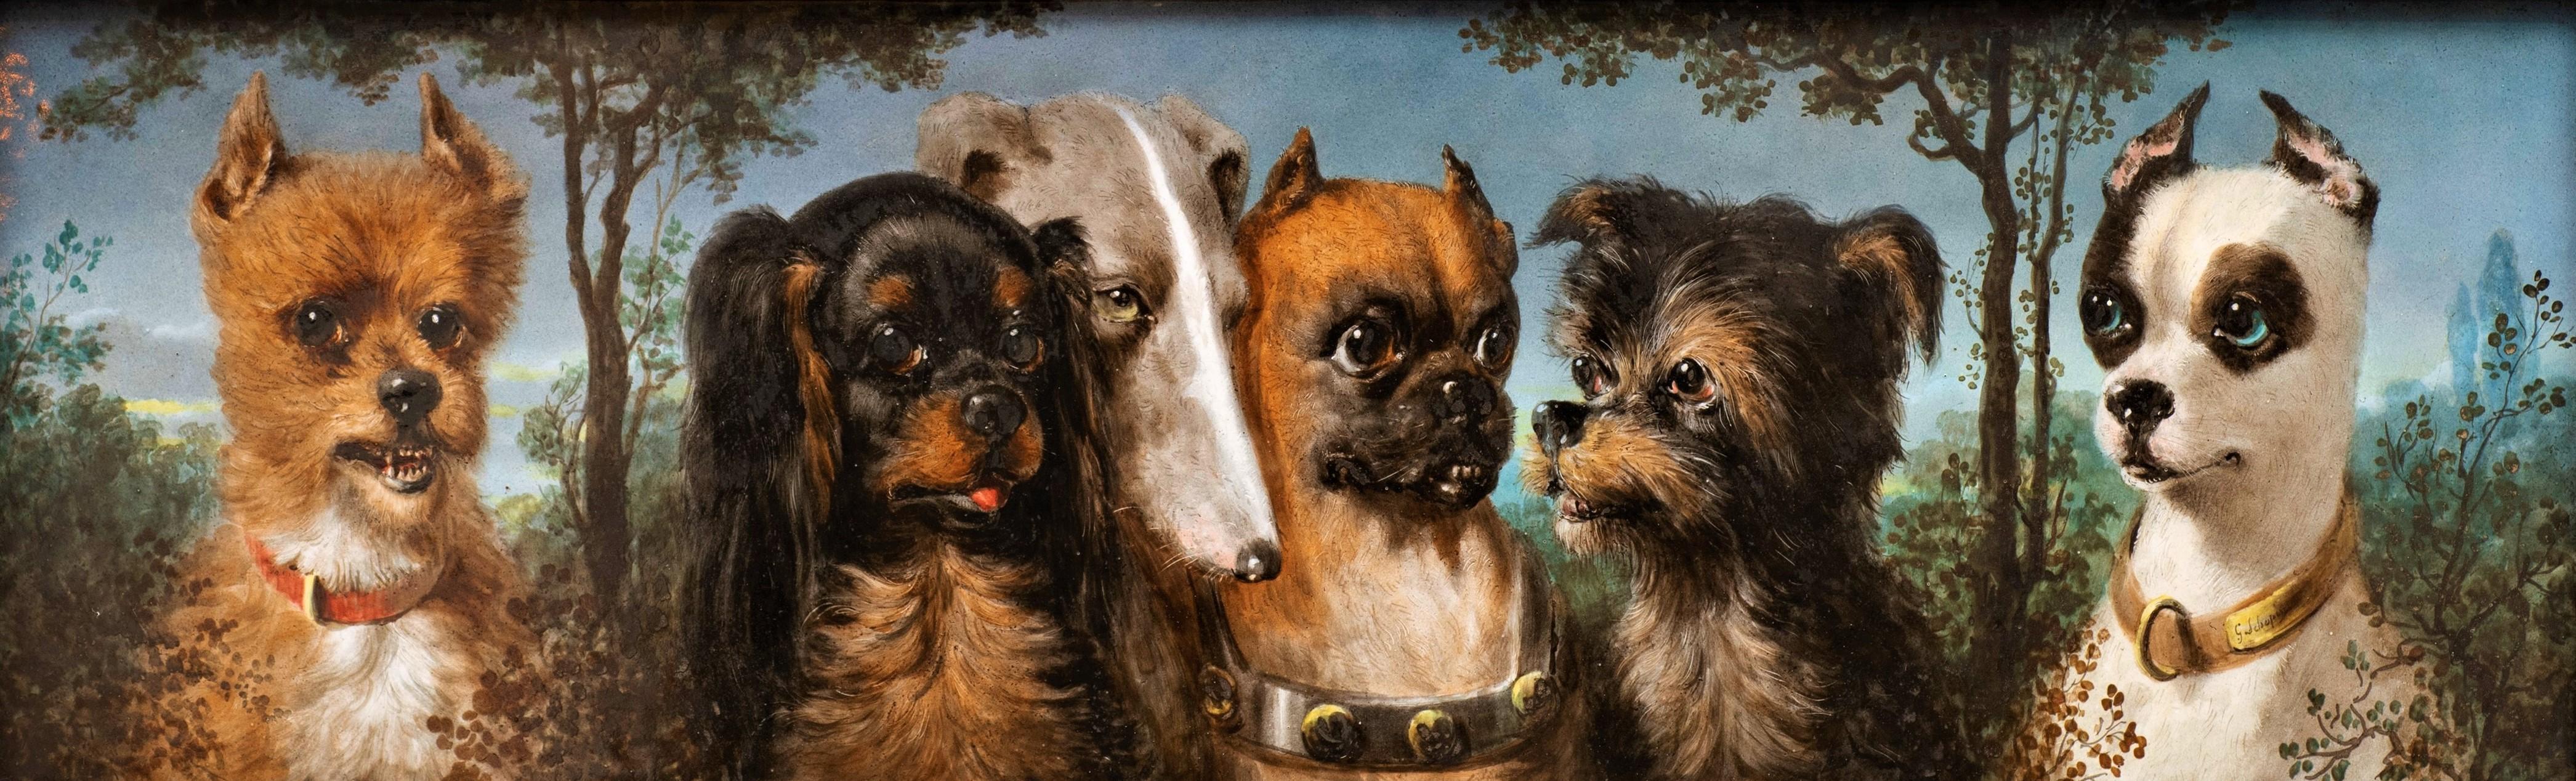 Antique Portrait of 6 Dogs on Porcelain by Maison Pichenot-Loebnitz ca. 1870s - Painting by Jules Loebnitz